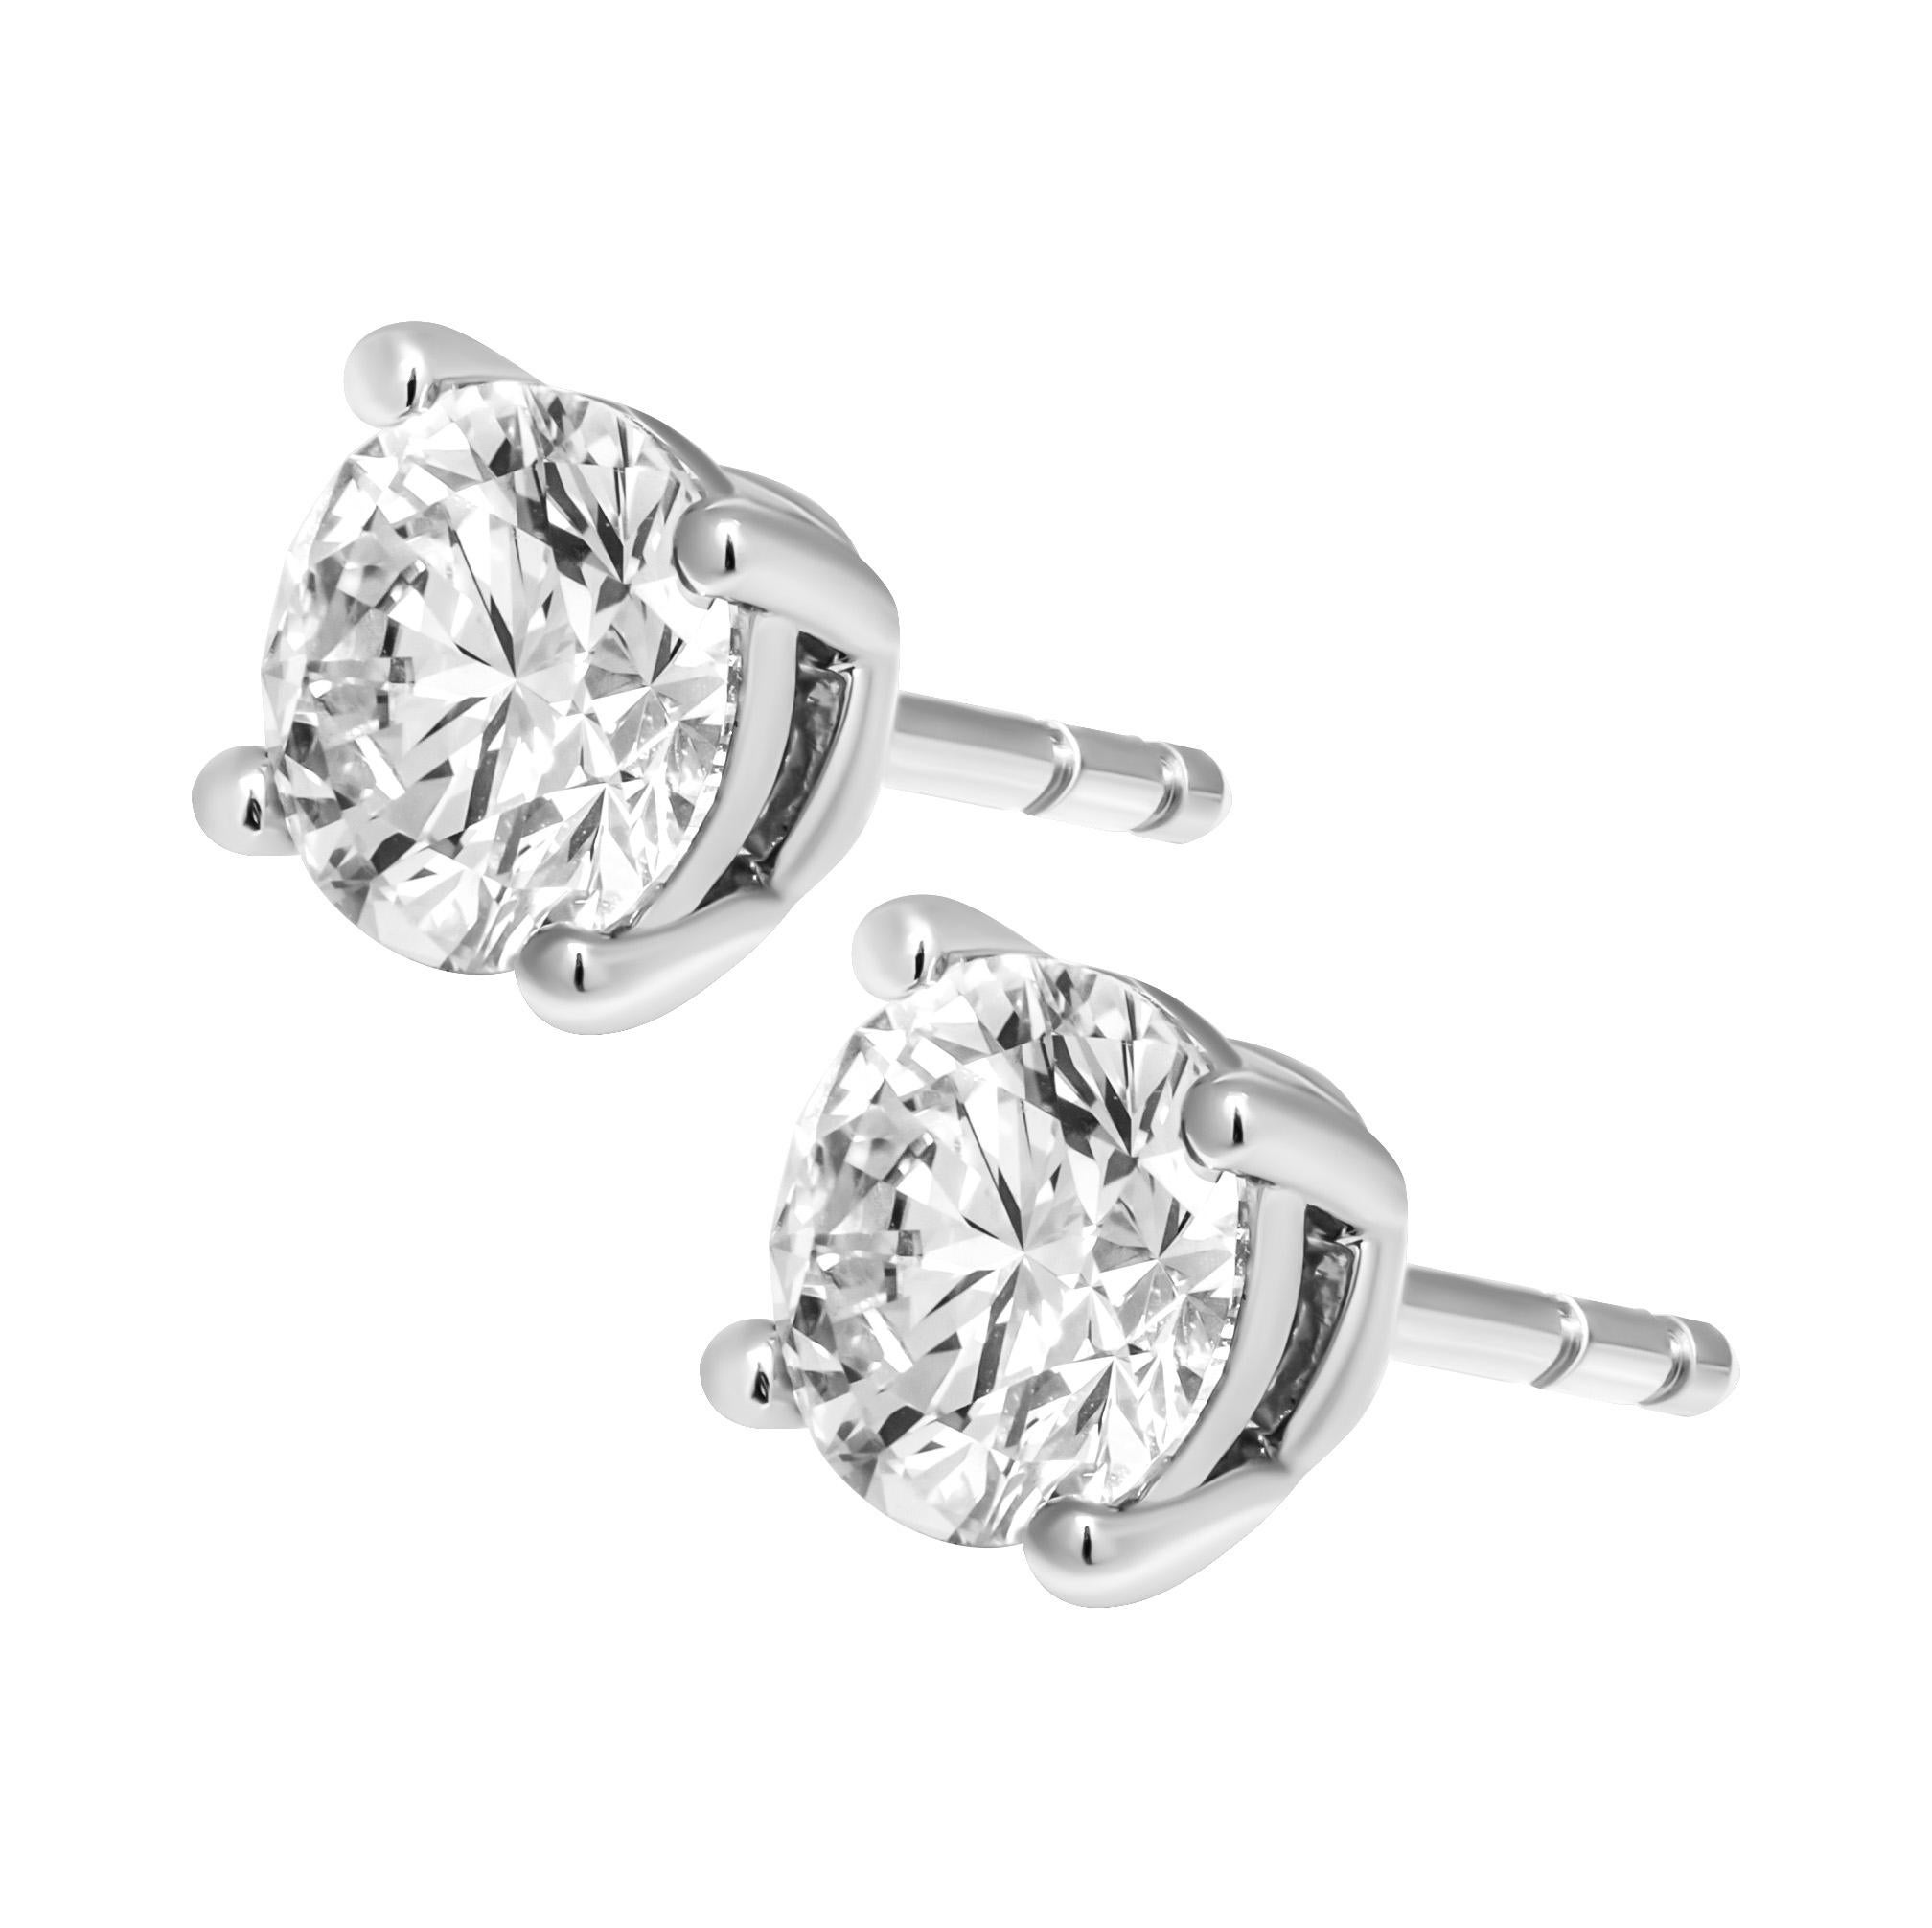 Round Cut GIA Certified 1.01 carat each round shape 4 prongs studs in Platinum For Sale